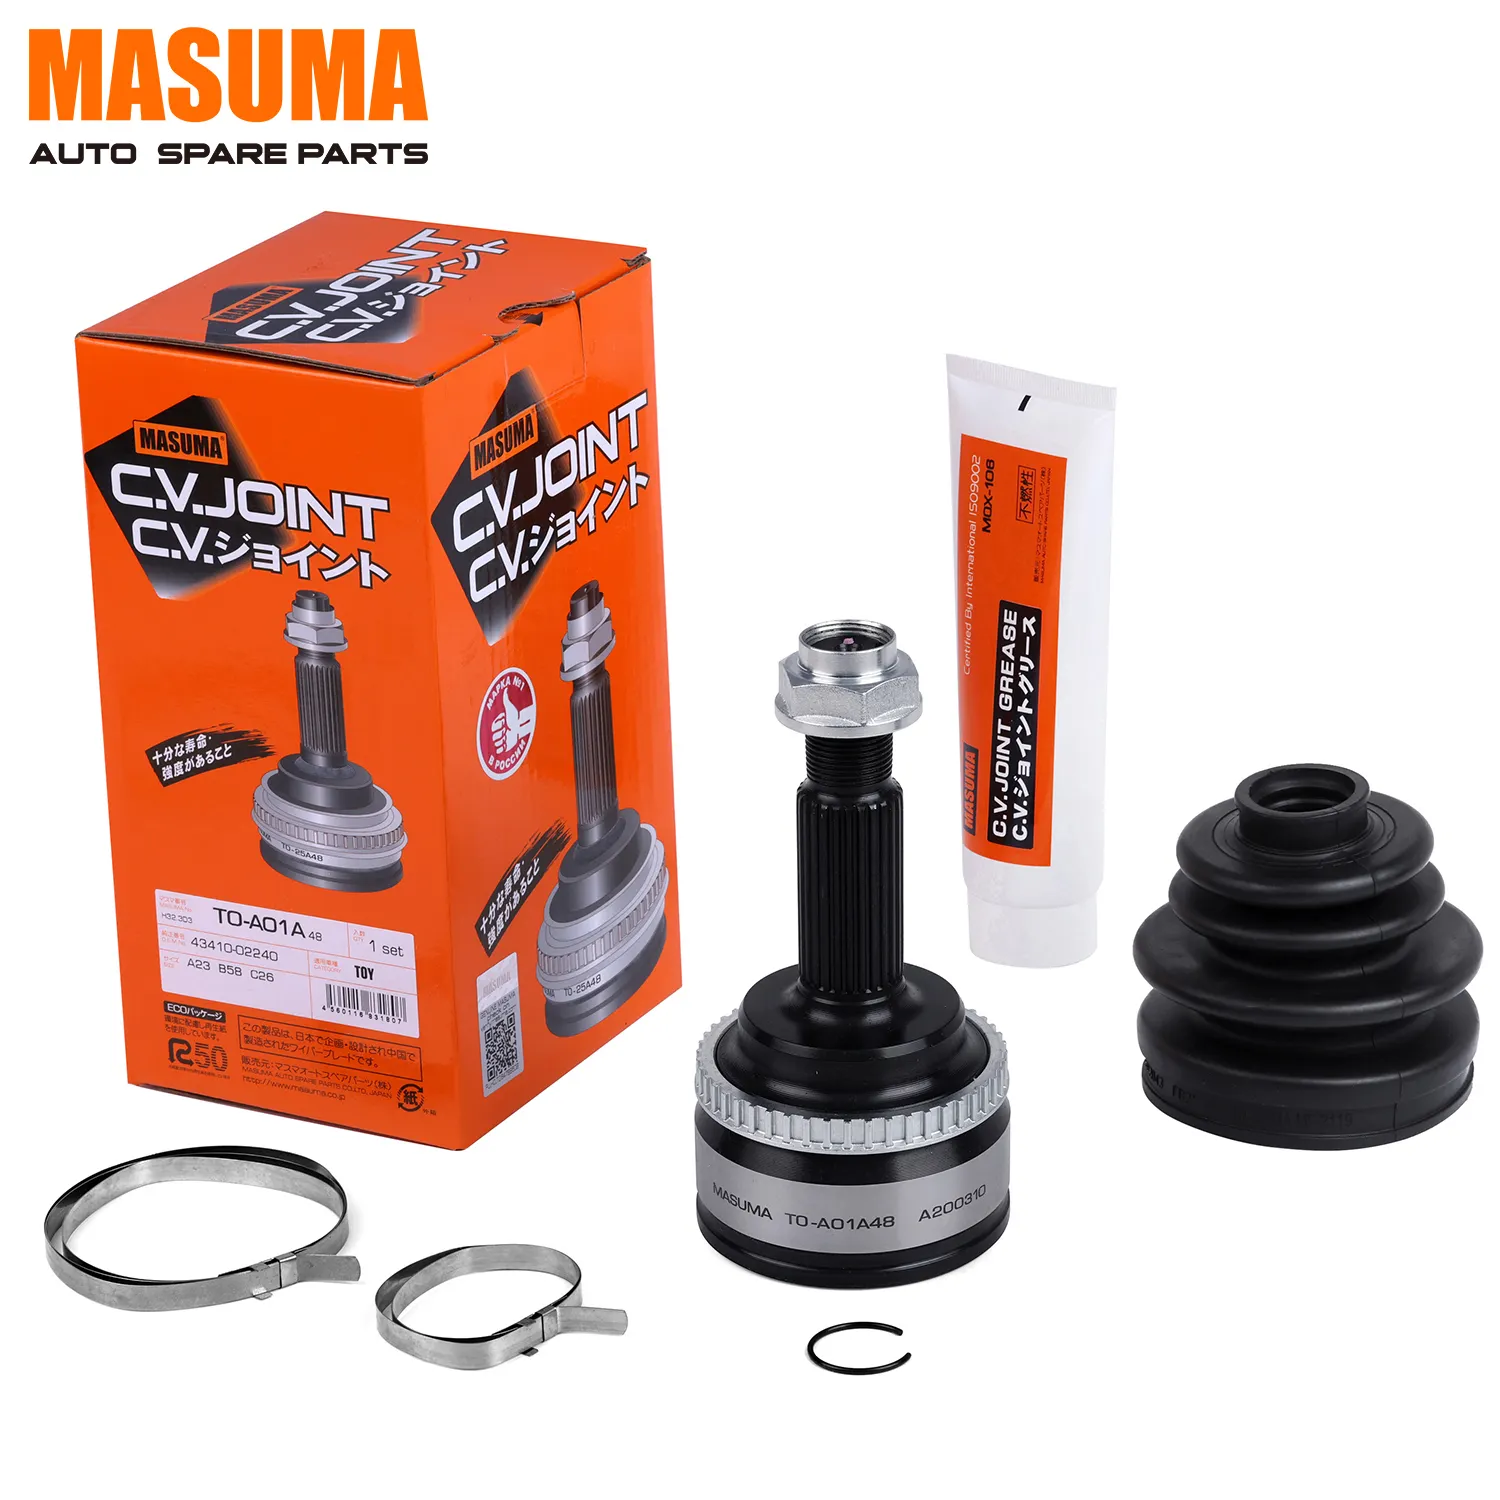 TO-A01A48 MASUMA ODM Auto Constant Propeller Shaft CV Joint Kit 43460-09890 43460-09890 for TOYOTA AVENSIS WAGON